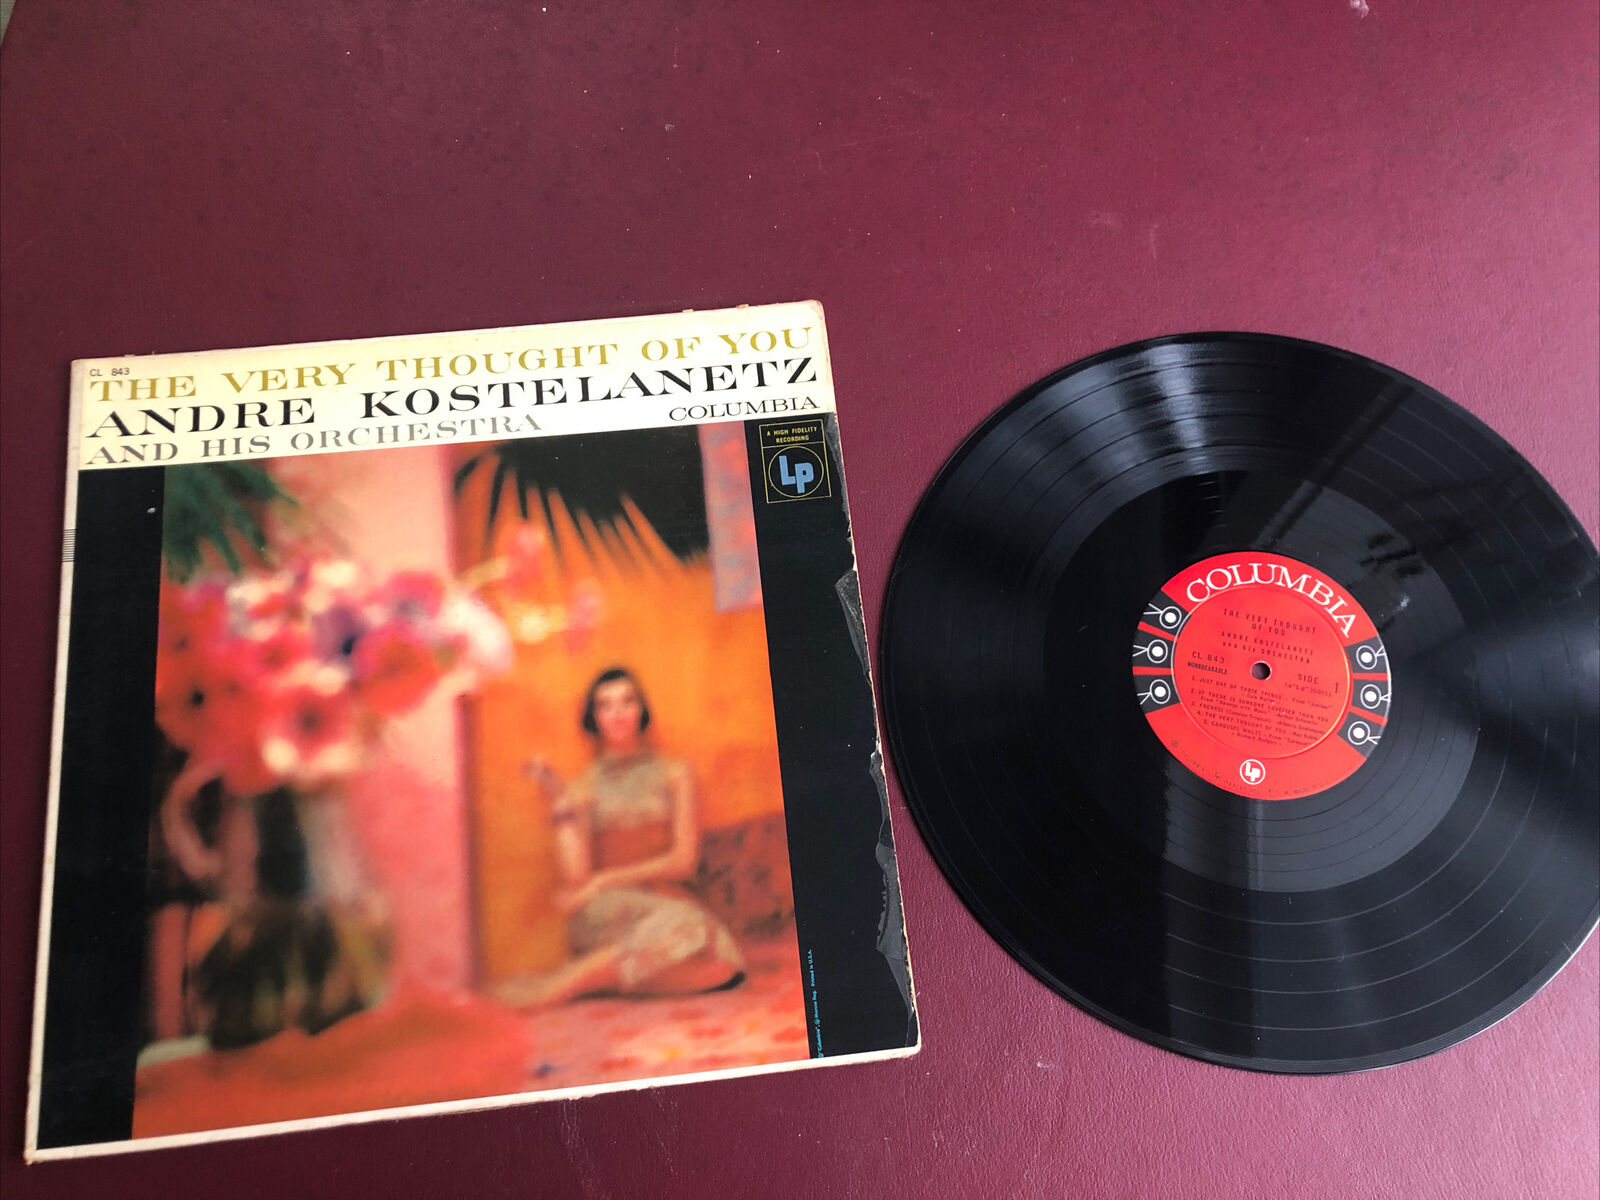 Record vinyl 33 album Lp 12" Andre Kostelanetz Very Thought Of You CL-843